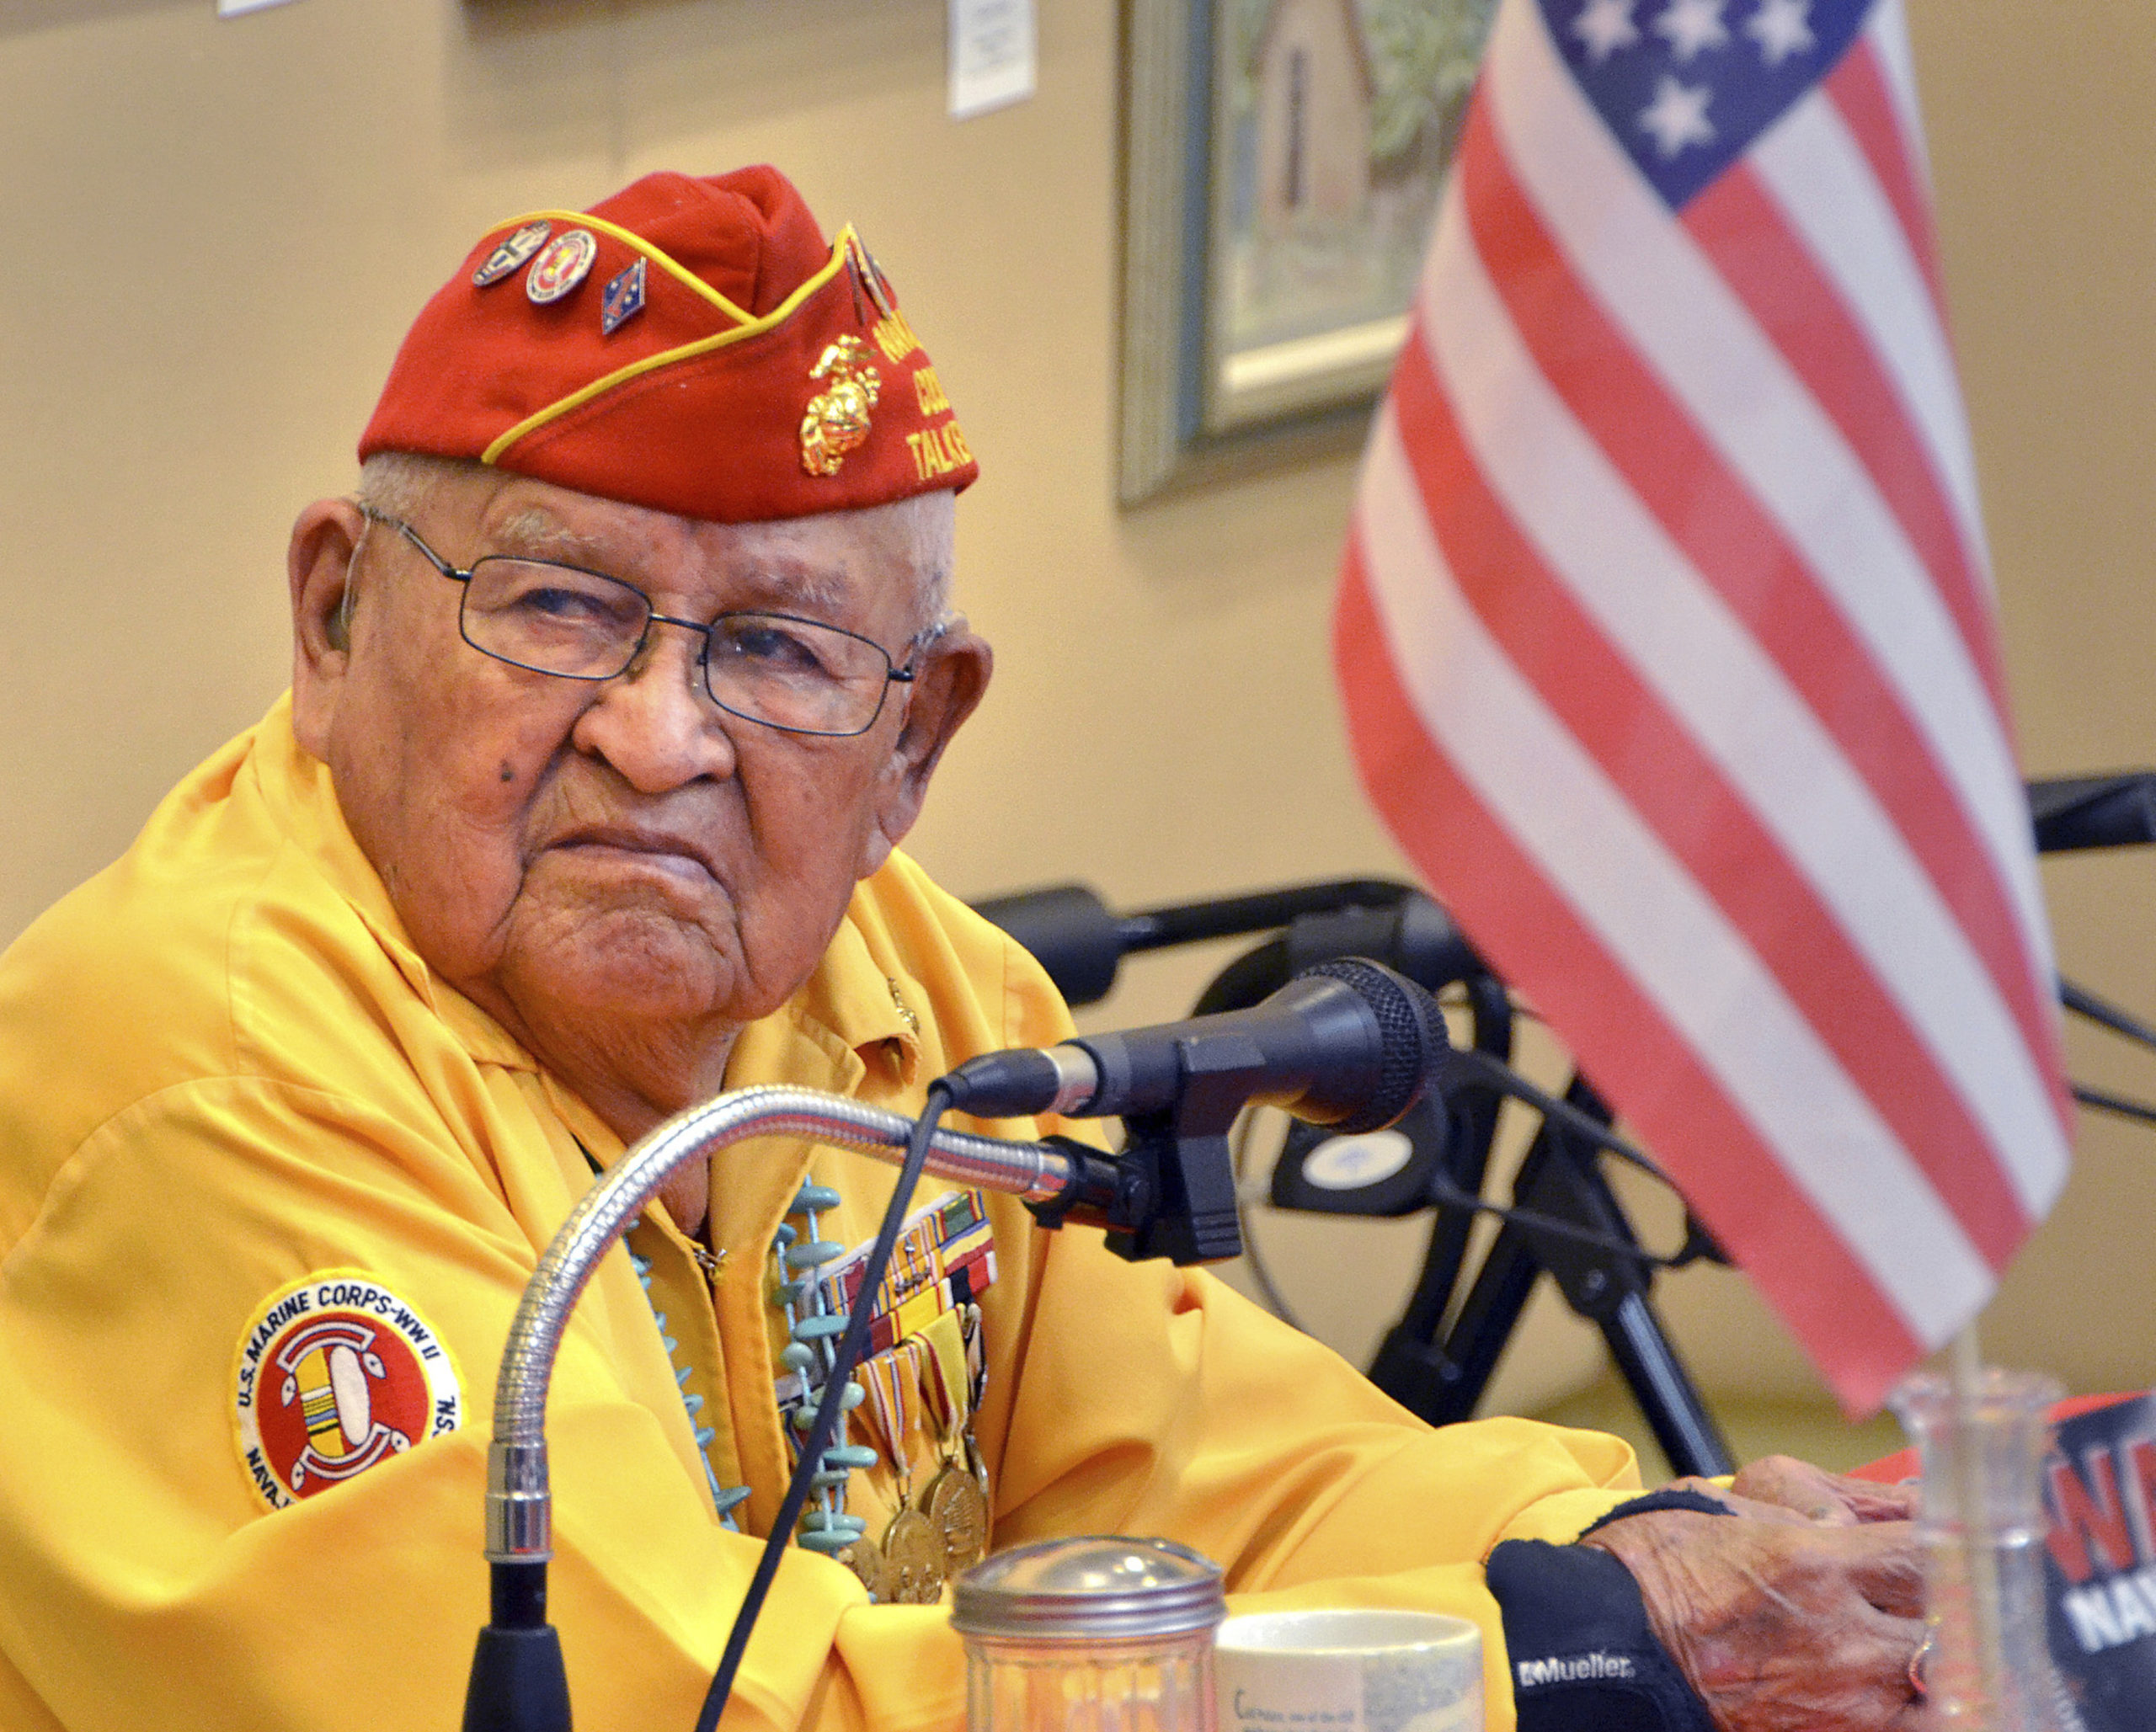 And Then There Were Three: One of the Last Living Navajo Code Talkers Dies at Age 98